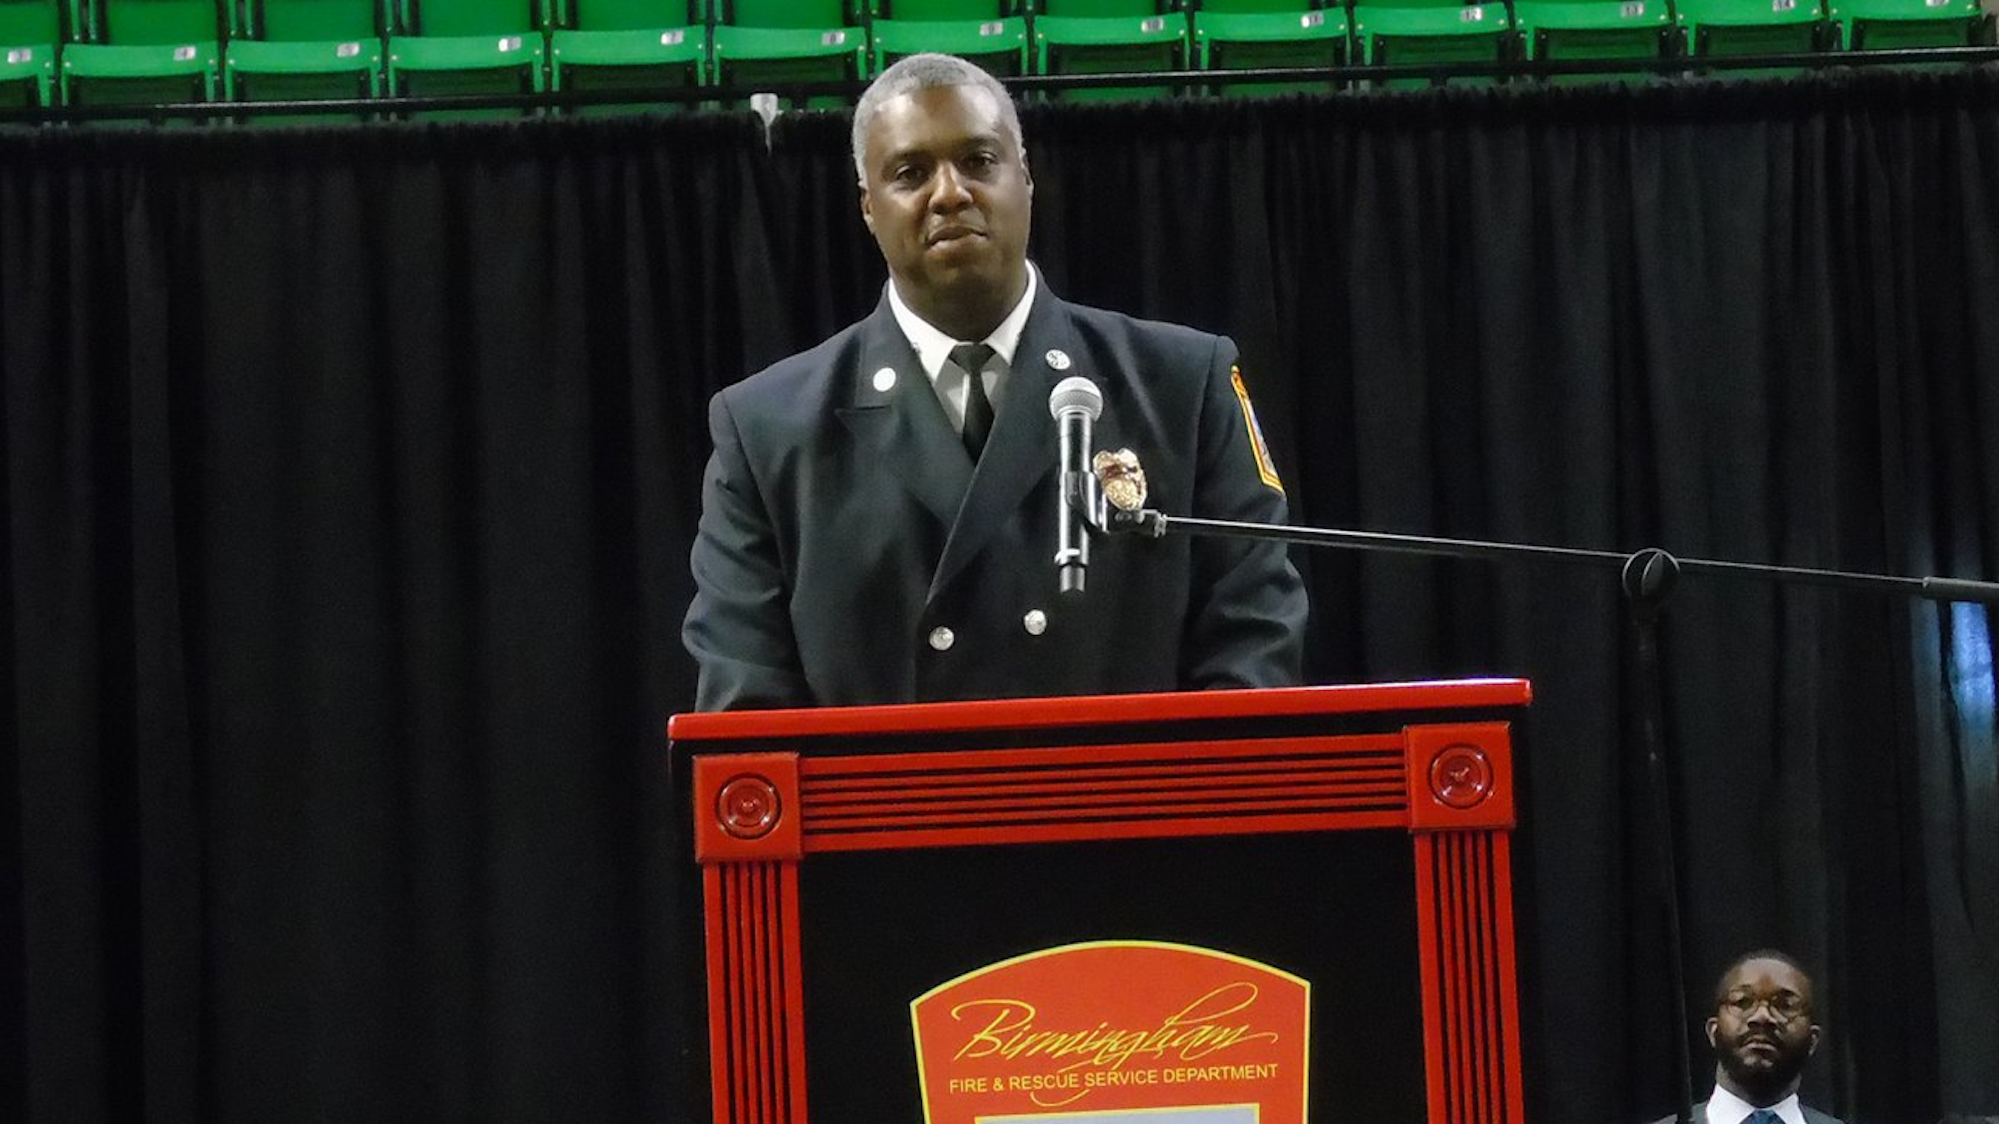 Veteran Firefighter Takes Oath of Office as New AL Fire Chief Firehouse